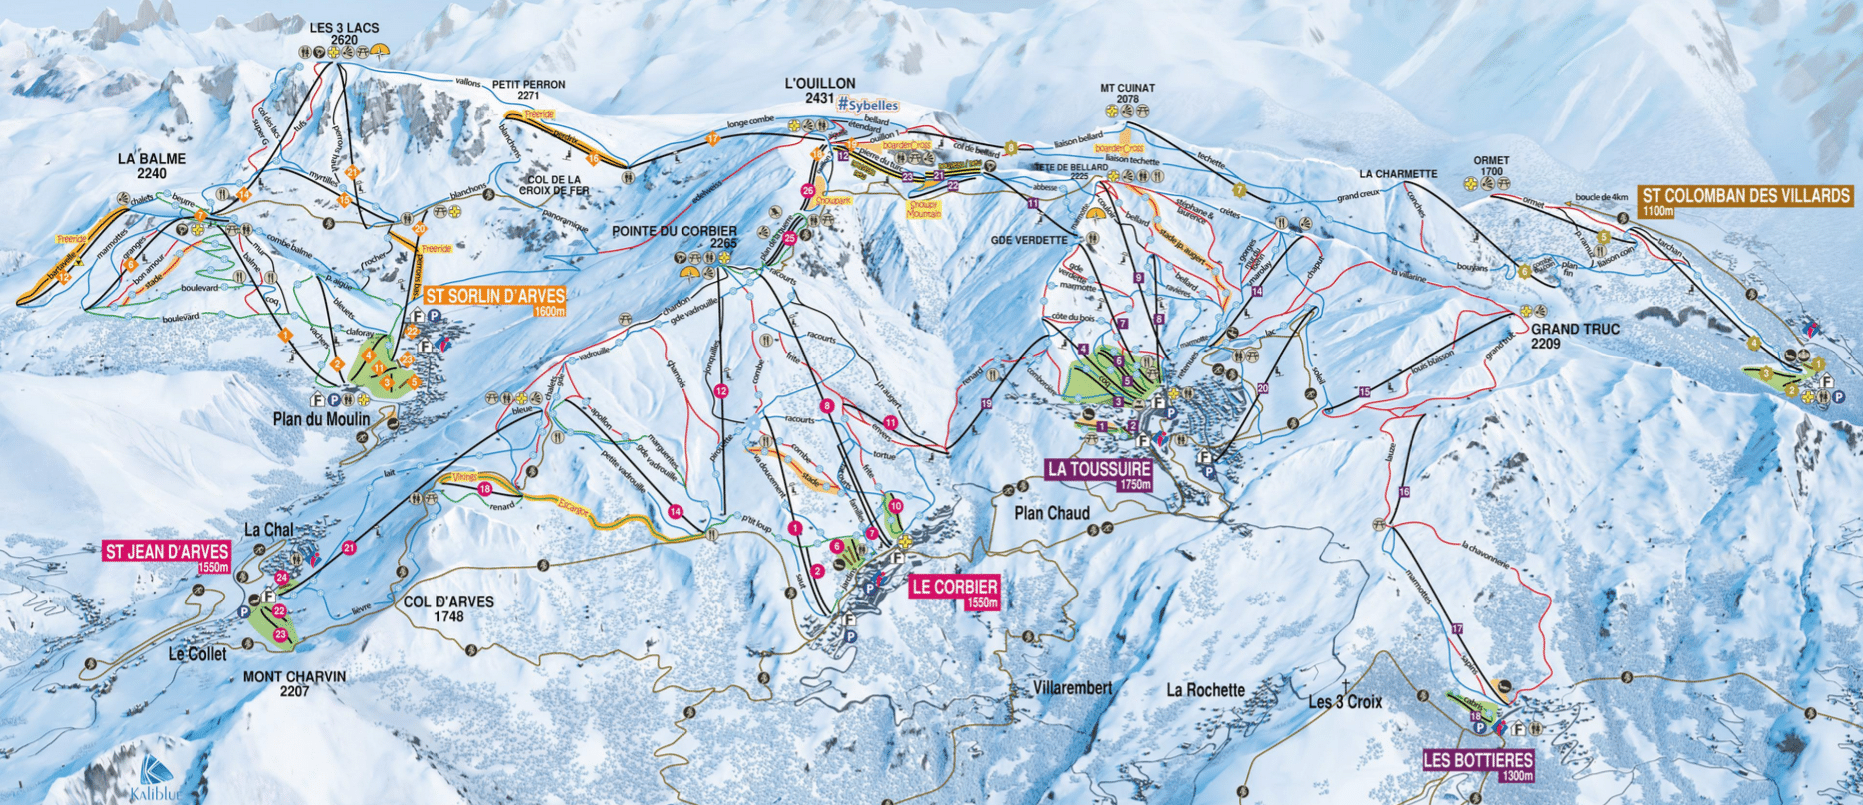 Les sybelles - Map of the ski slopes